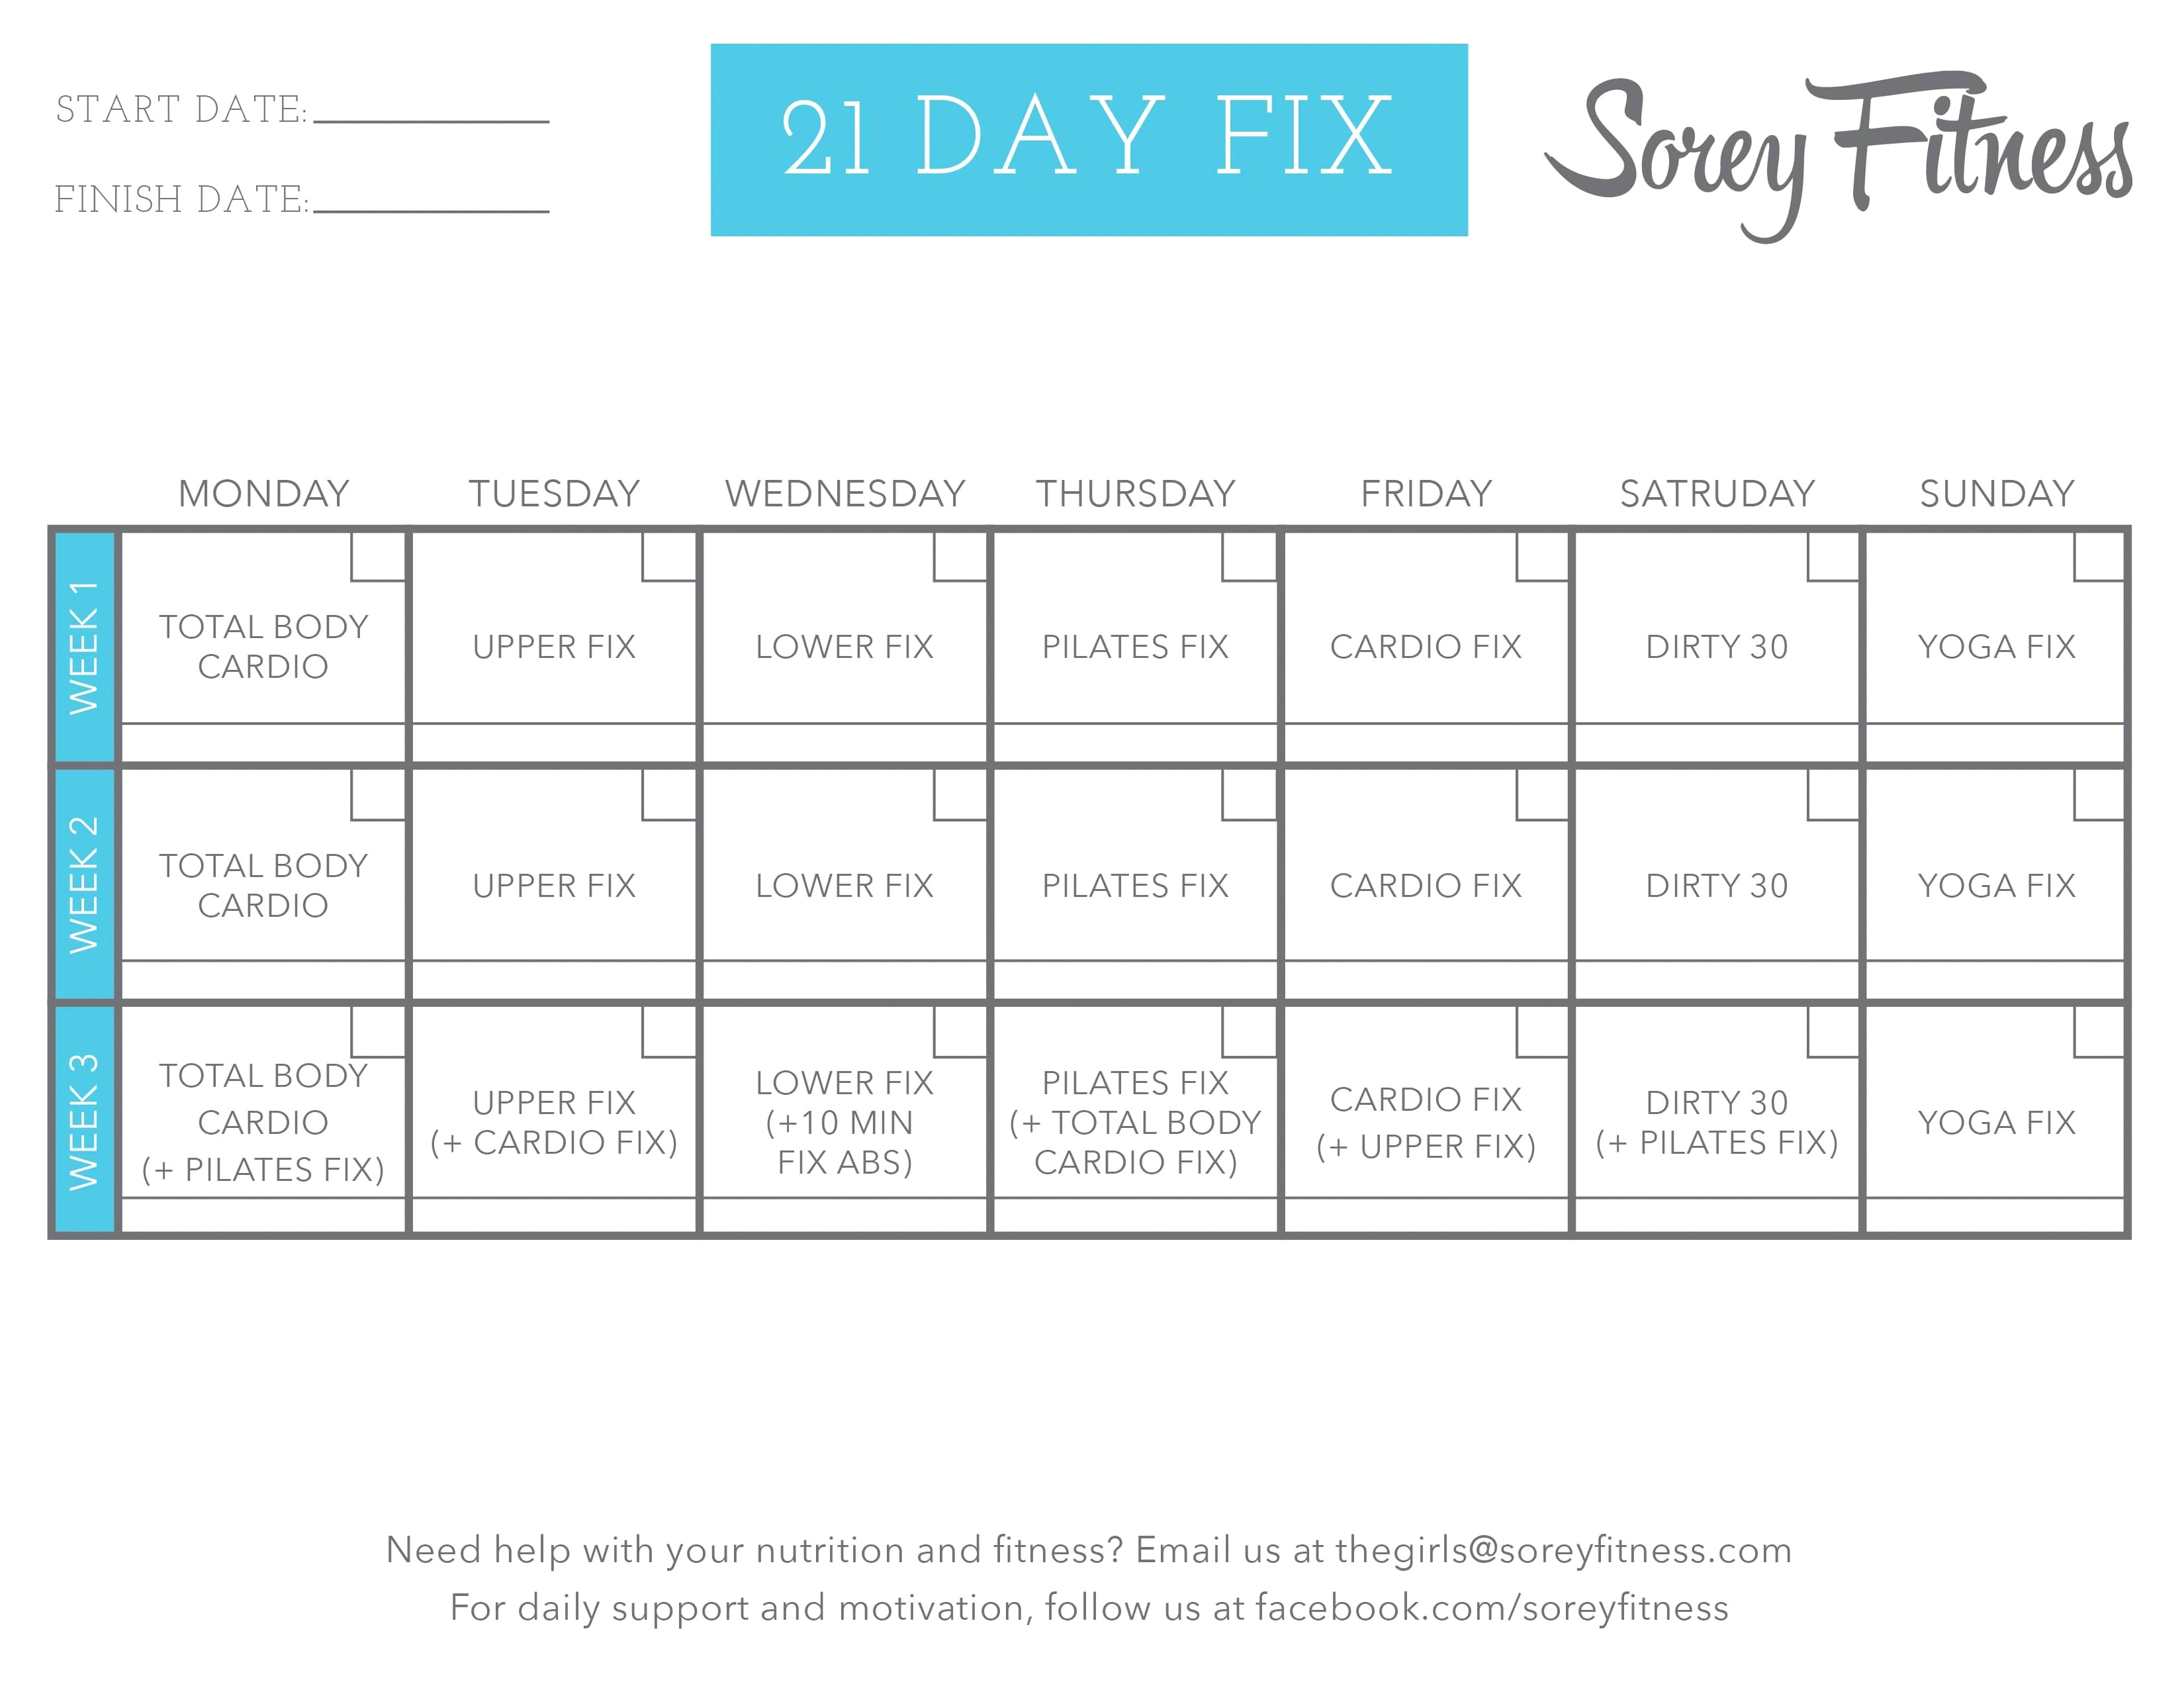 Your Repair Home Plan Reviews 50 Awesome Printable 21 Day Fix Meal Plan Template